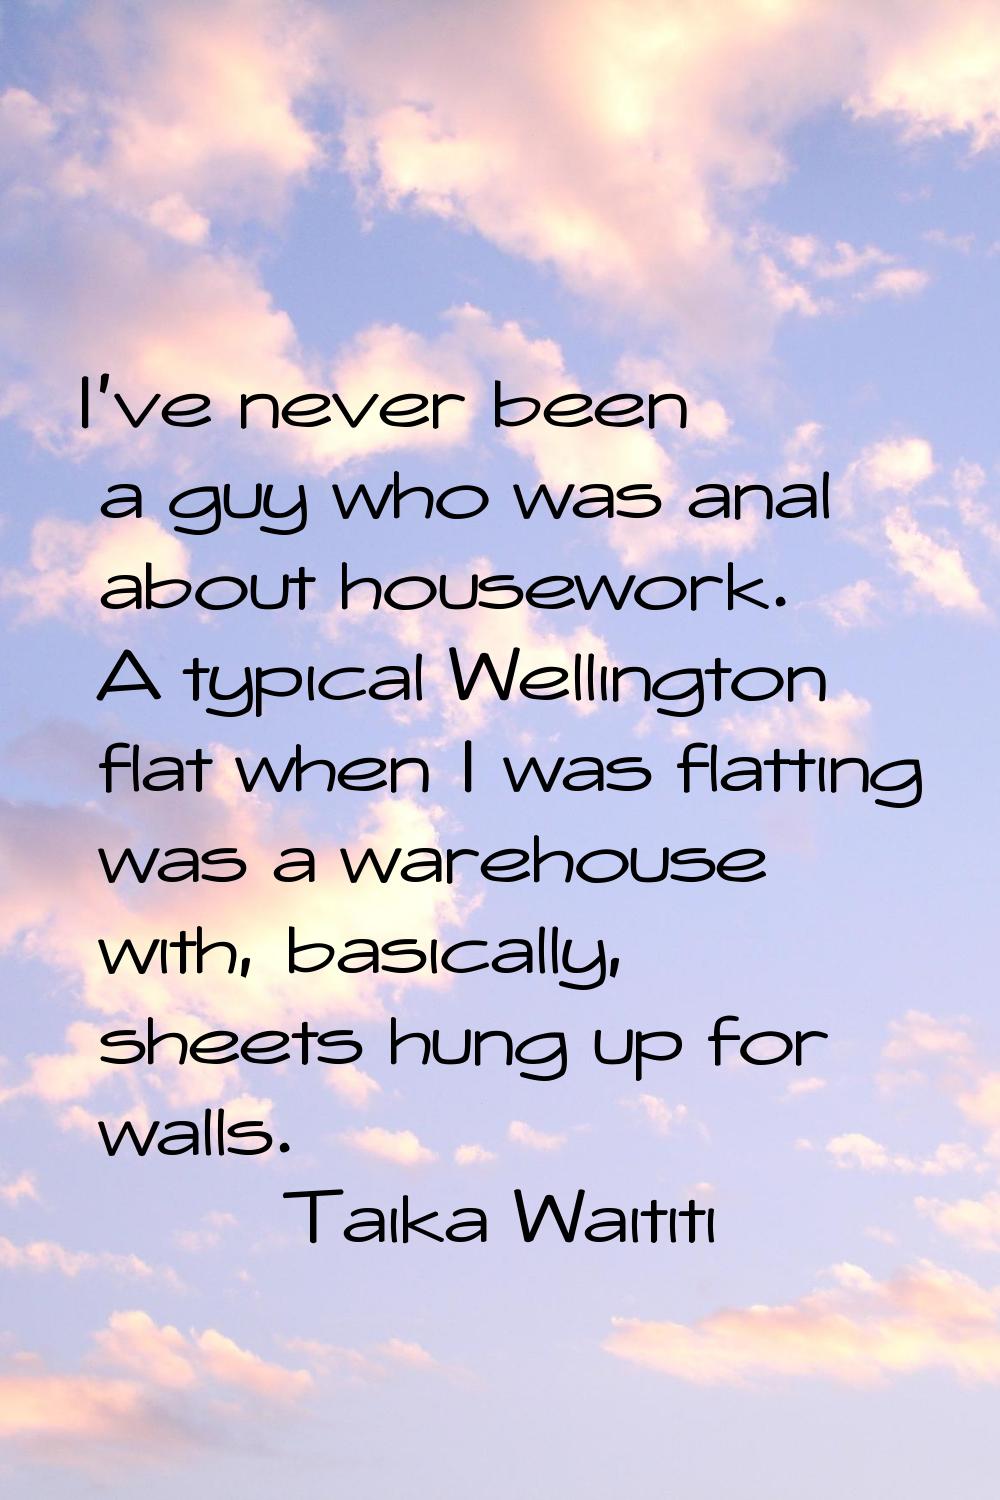 I've never been a guy who was anal about housework. A typical Wellington flat when I was flatting w